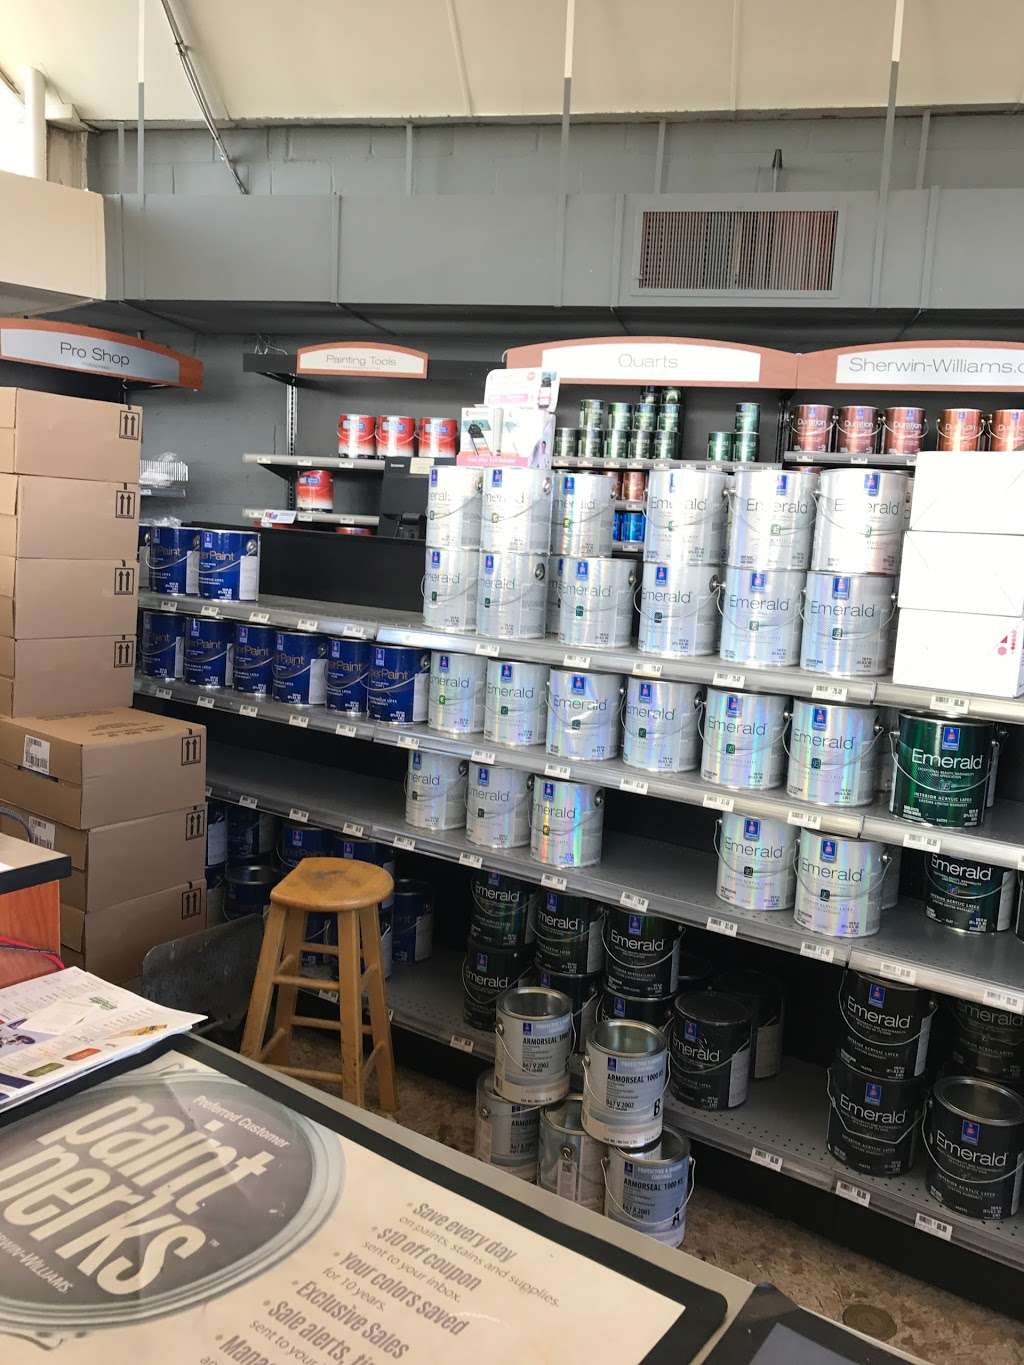 Sherwin-Williams Paint Store | 508 E Black Horse Pike, West Collingswood Heights, NJ 08059 | Phone: (856) 456-1365